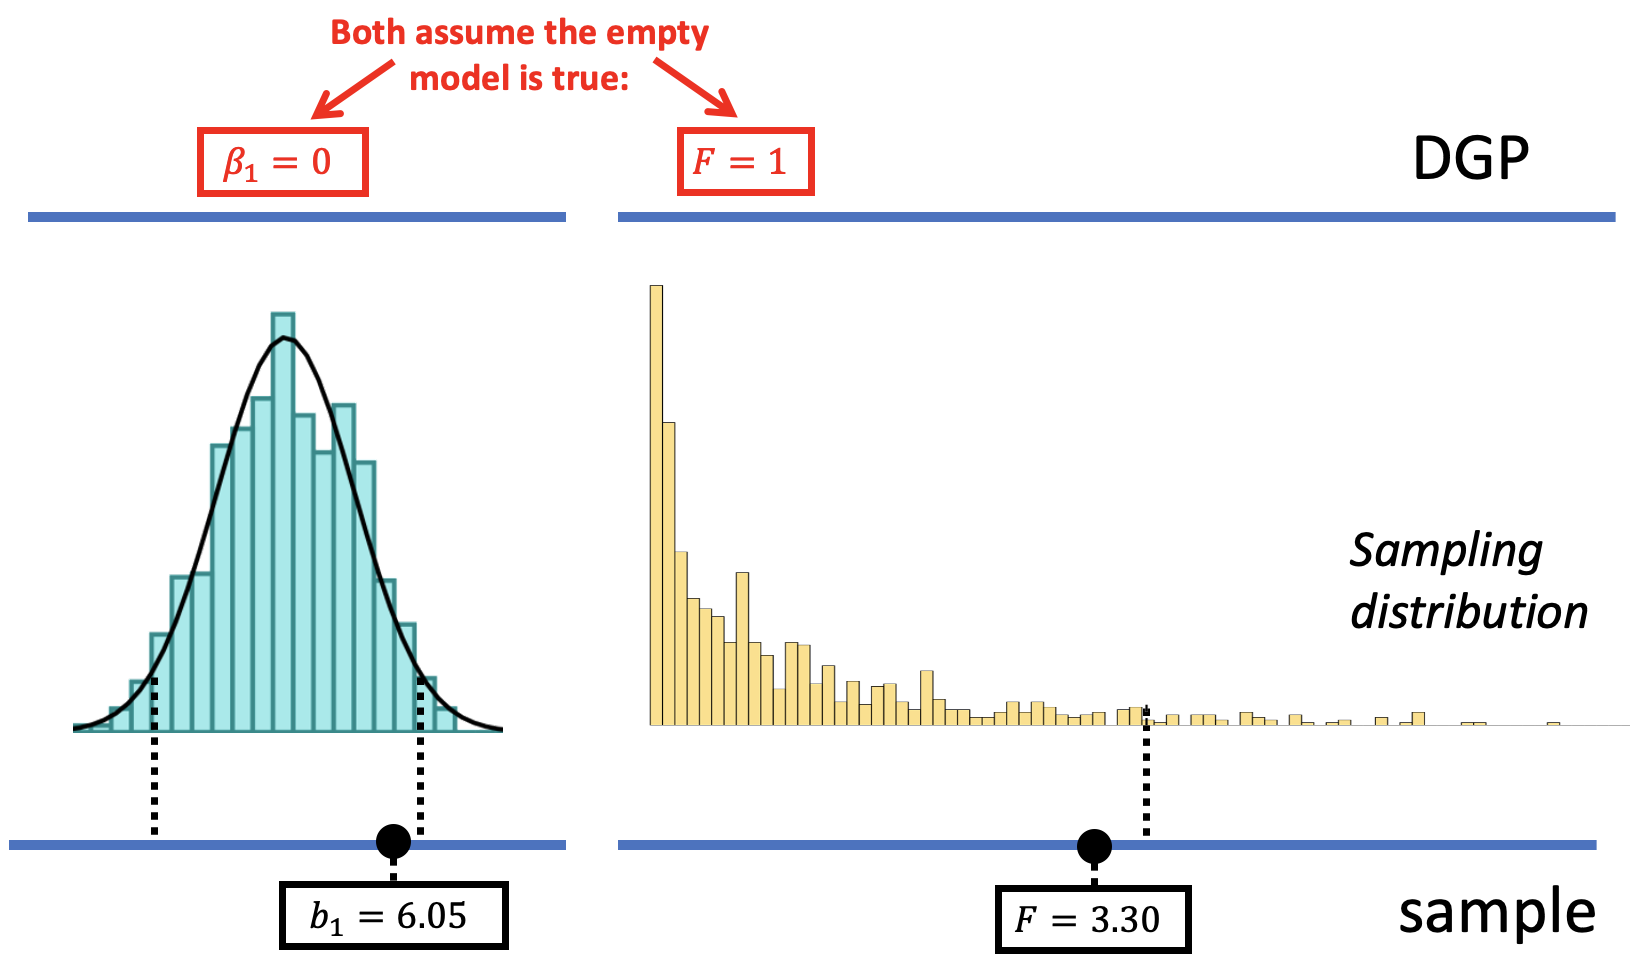 A diagram of the DGP, the sampling distribution, and the sample. It compares a sampling distribution of b1 and a sampling distribution of F. The DGP for beta sub one and for F both assume the empty model is true, which assumes beta sub one is zero and F is one. The sample b1 is marked at 6.05 and falls with the middle 95 percent of samples in the sampling distribution of b1. The sample F is marked at 3.3 and falls within the smallest 95 percent of F values in the sampling distribution of F.